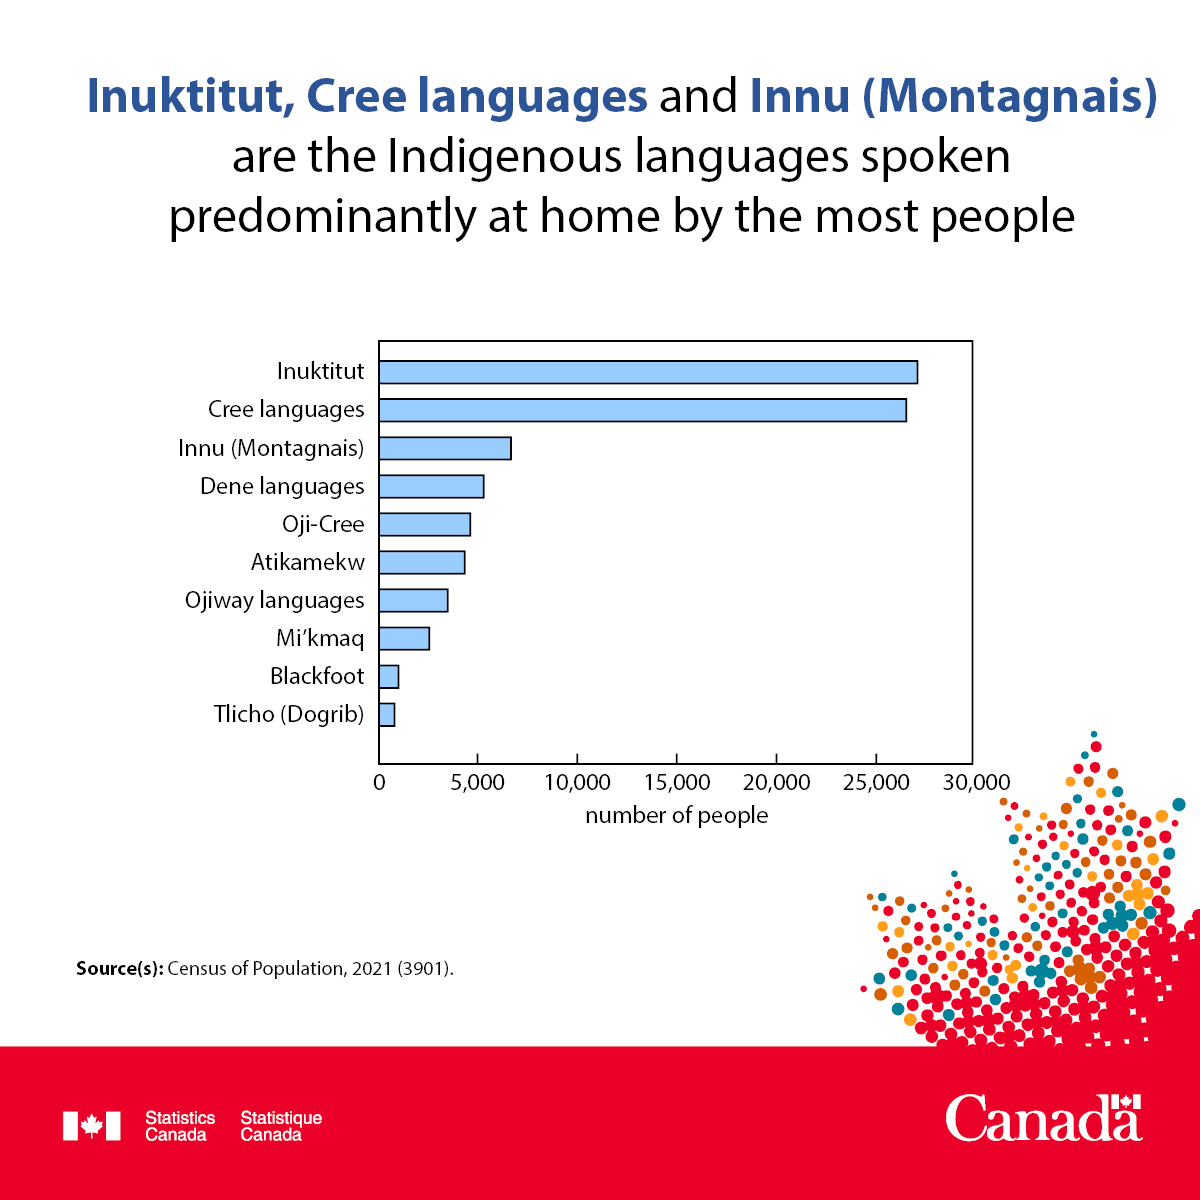 Post 3 image - Inuktitut, Cree languages and Innu (Montagnais) are the Indigenous languages spoken predominantly at home by the most people